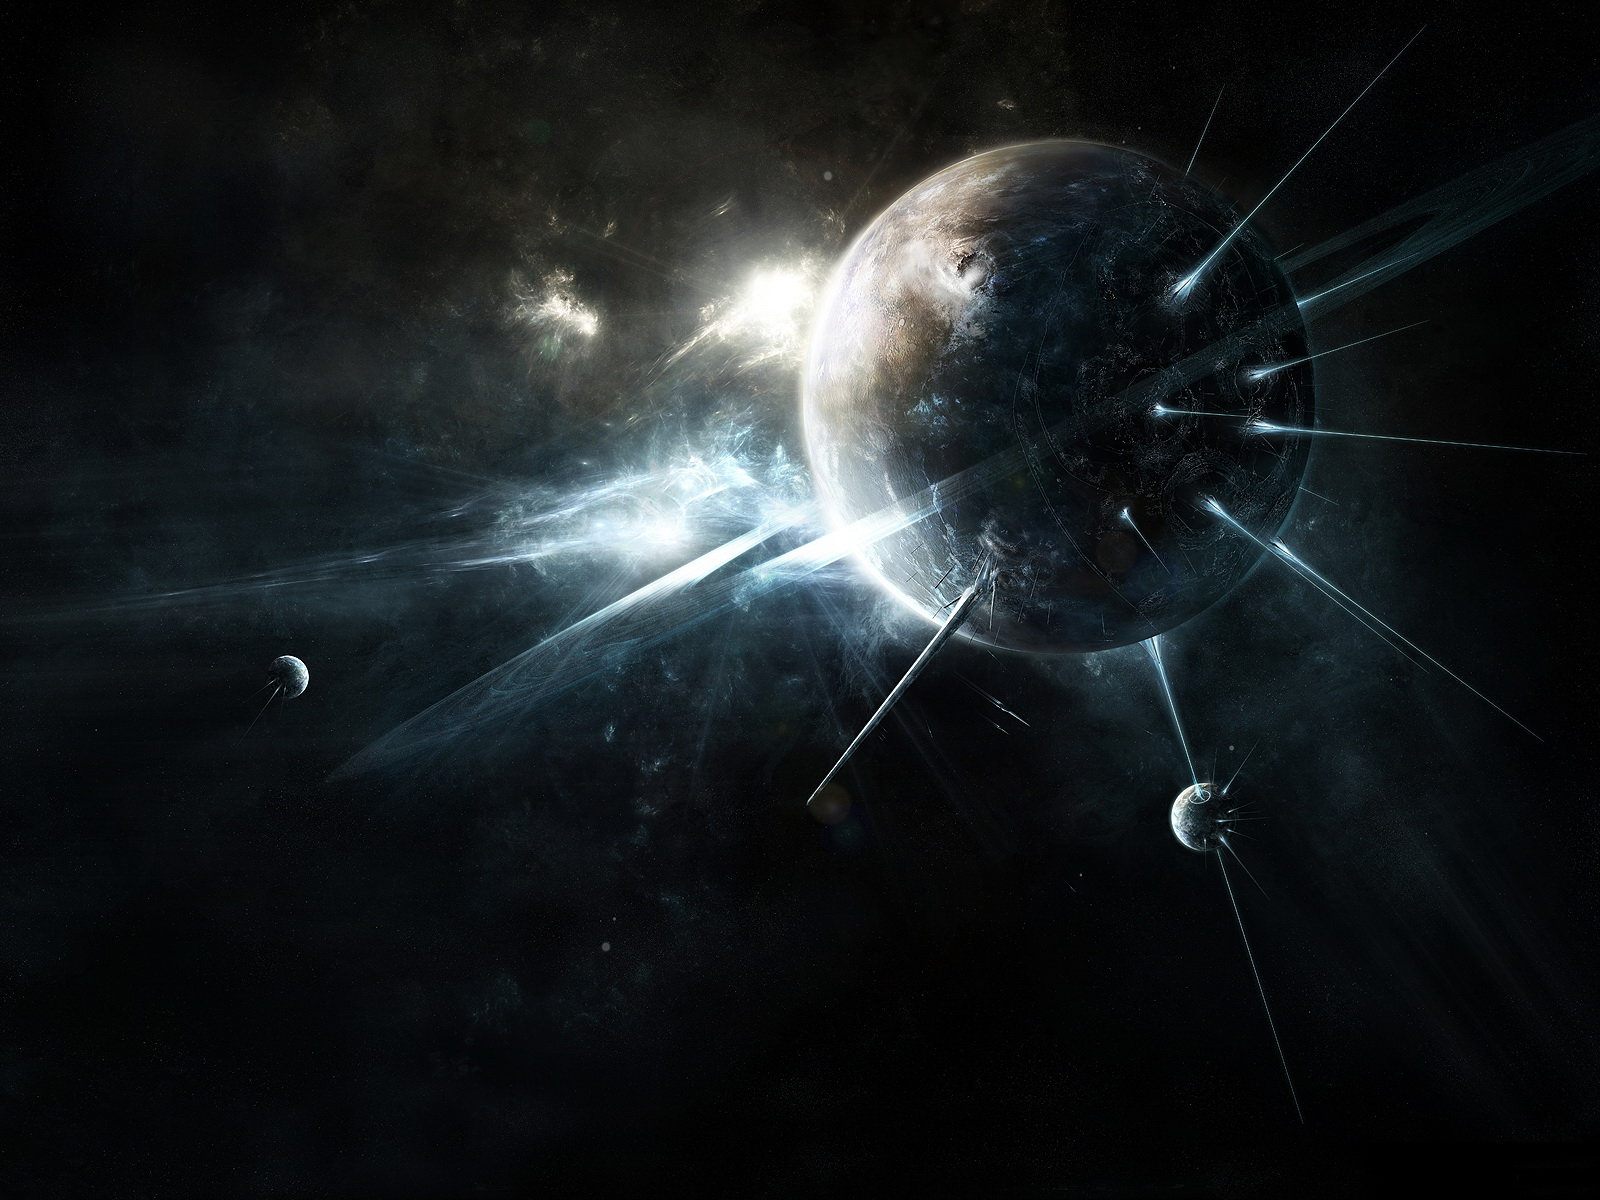 Dark Moon Space Abstract Wallpapers HD Widescreen